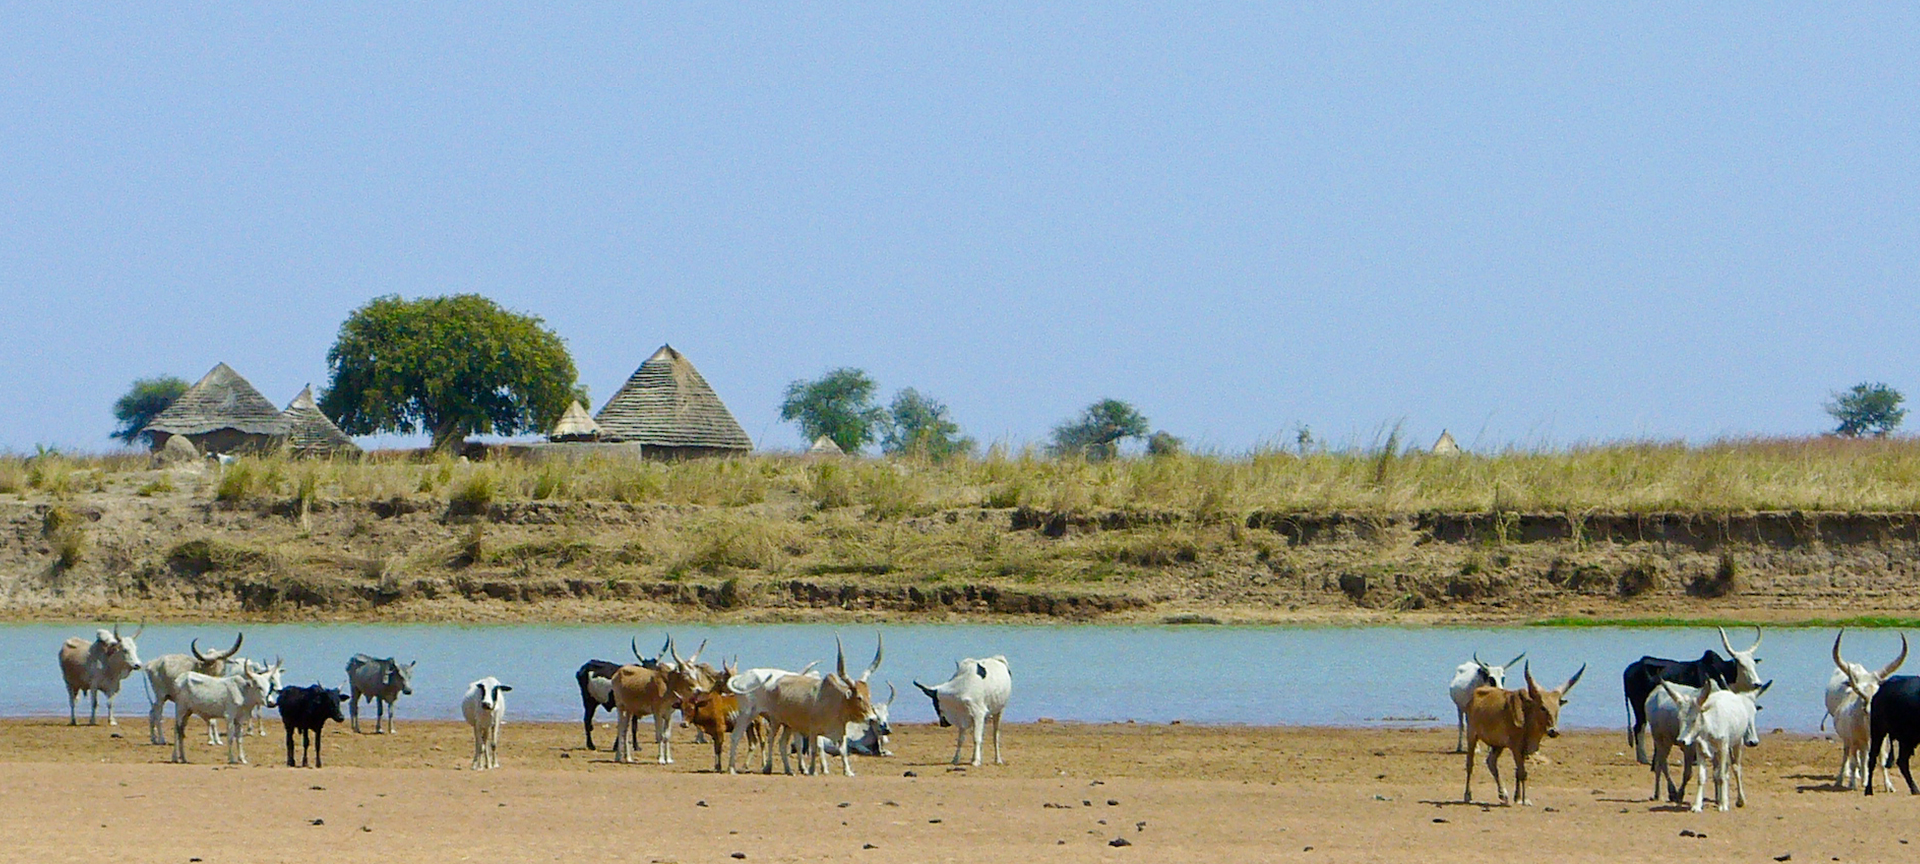 A group of bulls and cattle gather near a river in a rural area. 